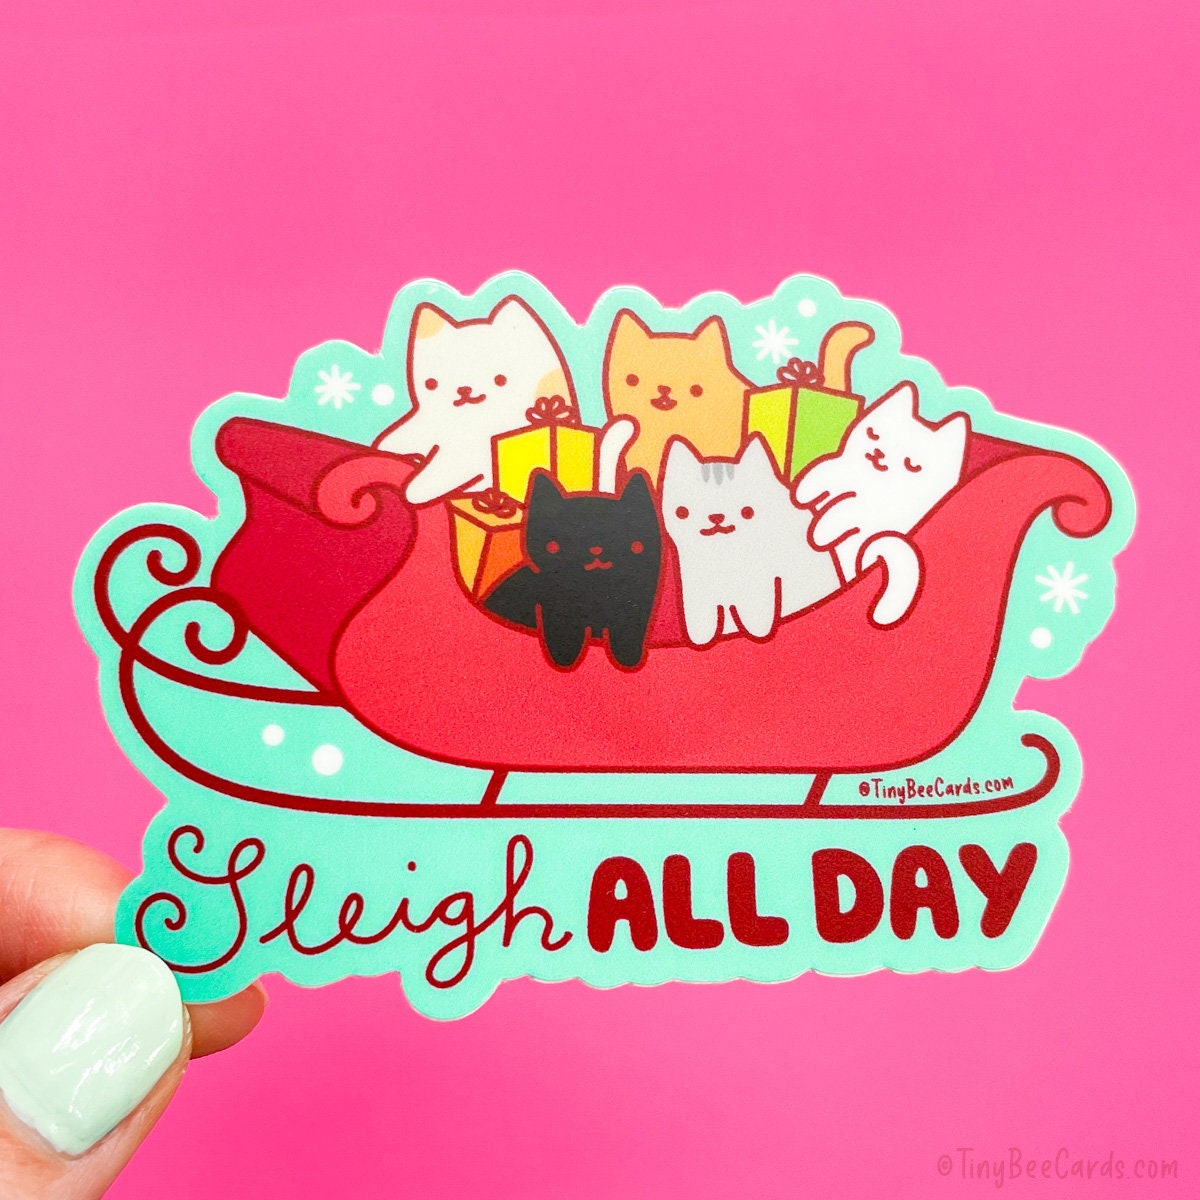 A fun and festive vinyl sticker featuring a cute cat squad with a black cat, a calico, an orange cat, a white cat, and a grey striped cat, all in a Christmas sleigh with plenty of presents. The pun text below says "Sleigh all day."